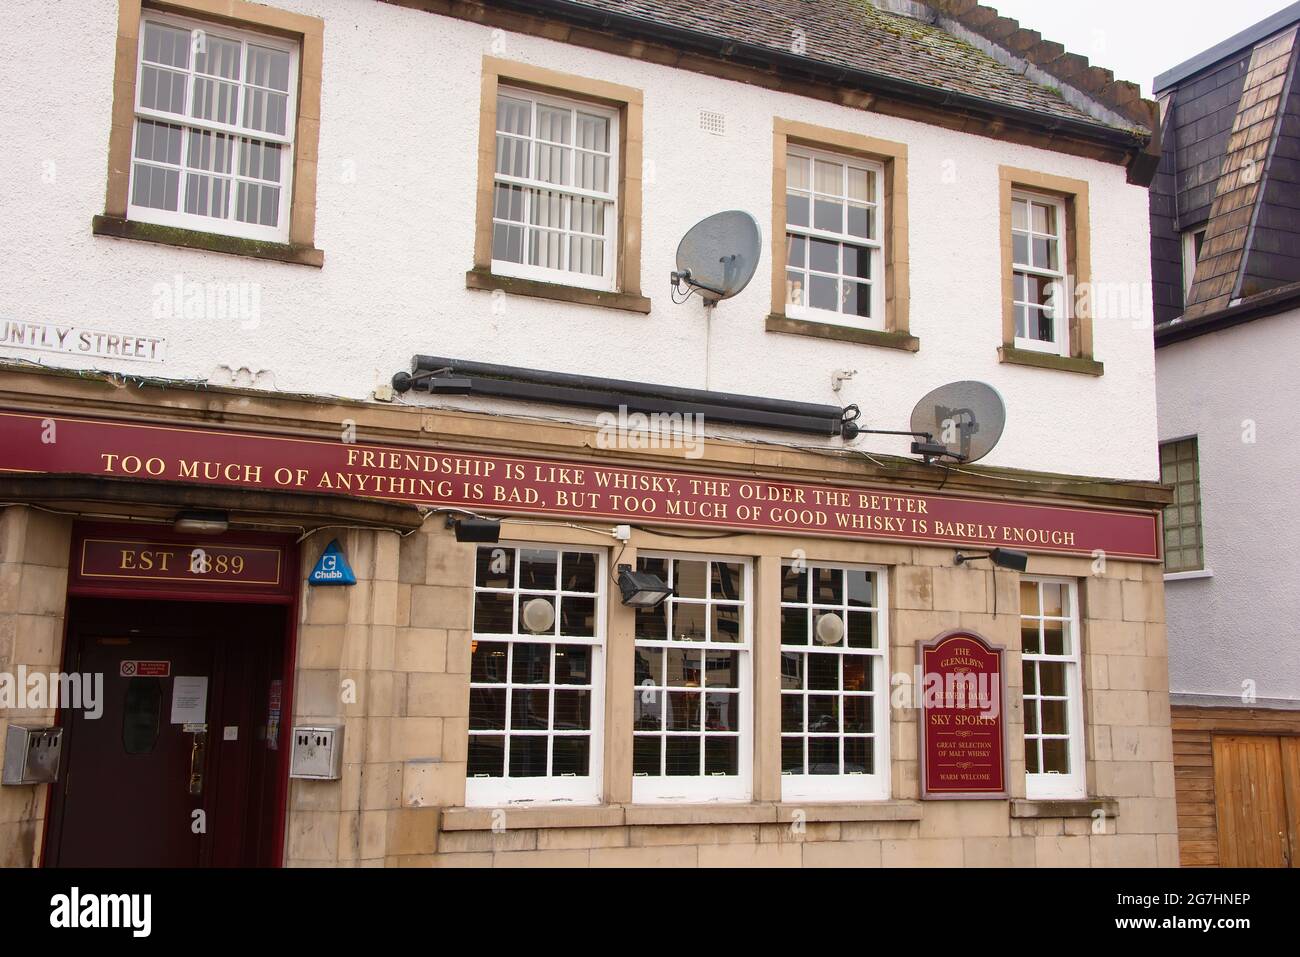 Inverness, Scotland, UK - August 13, 2018:  Popular locals pub on Huntly Street in the small village of Inverness, Scottish Highlands. Stock Photo